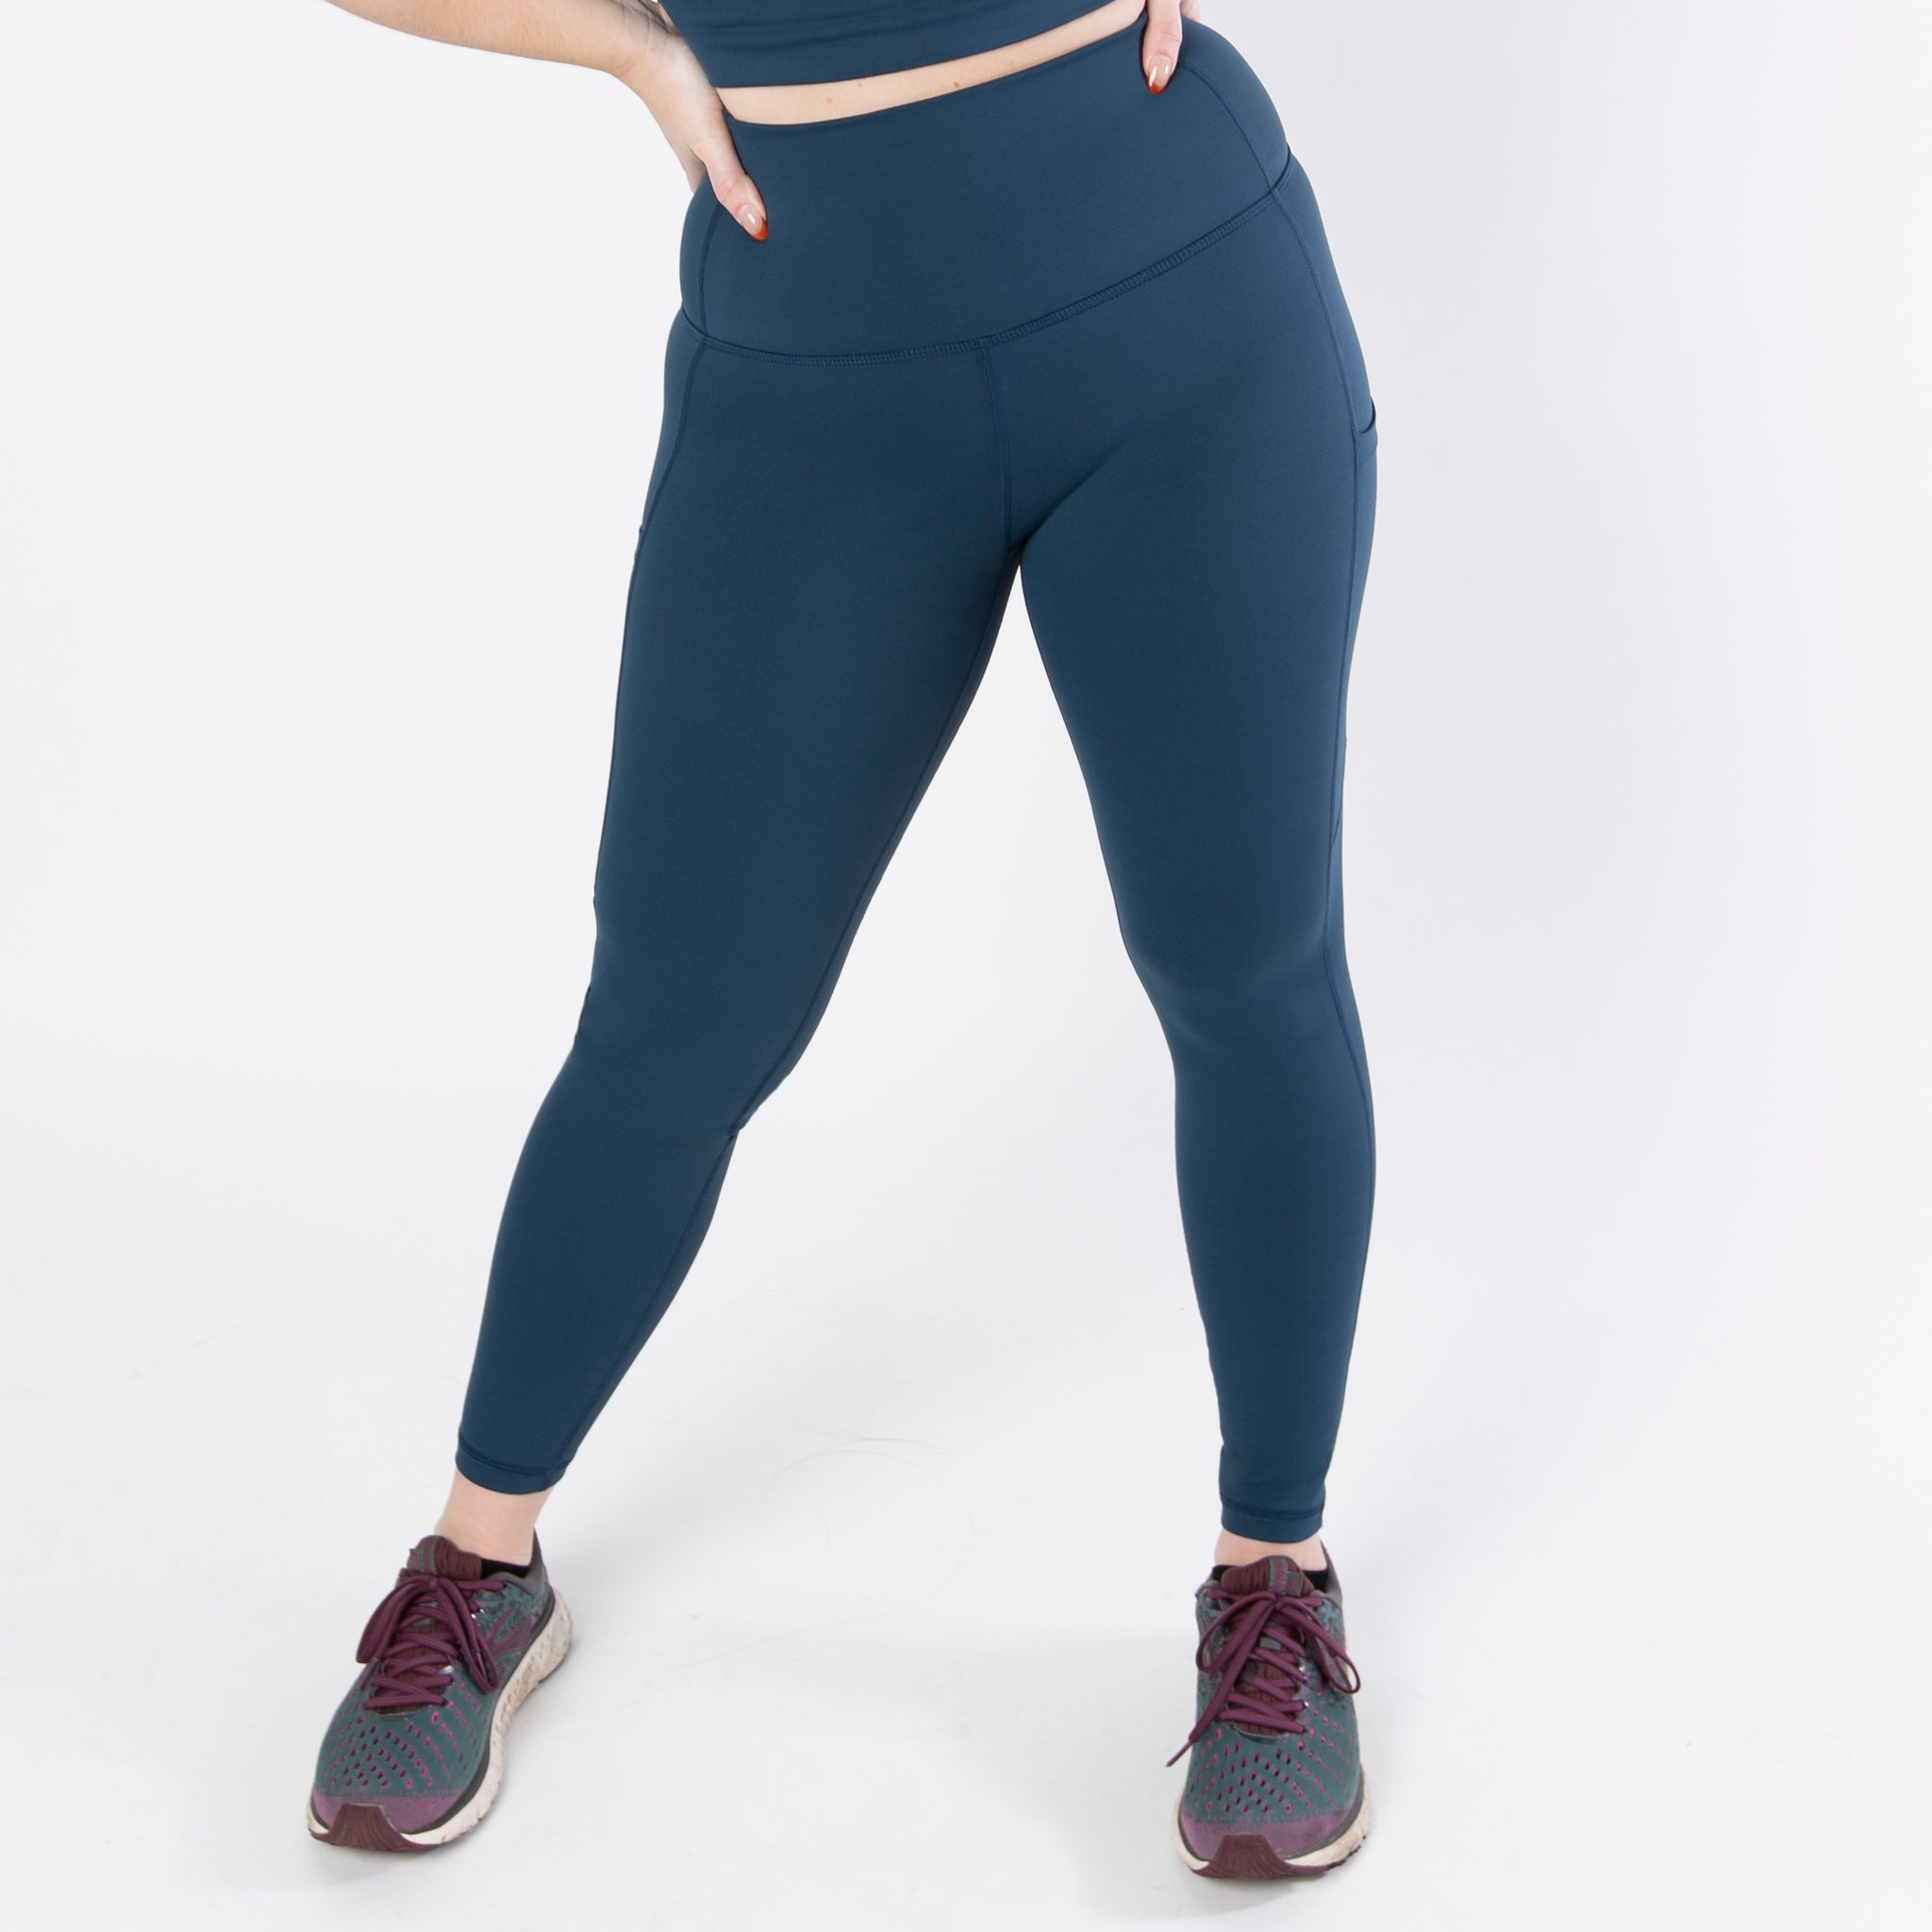 Balance Athletica Limited-Edition Kingdom Collection Legging In